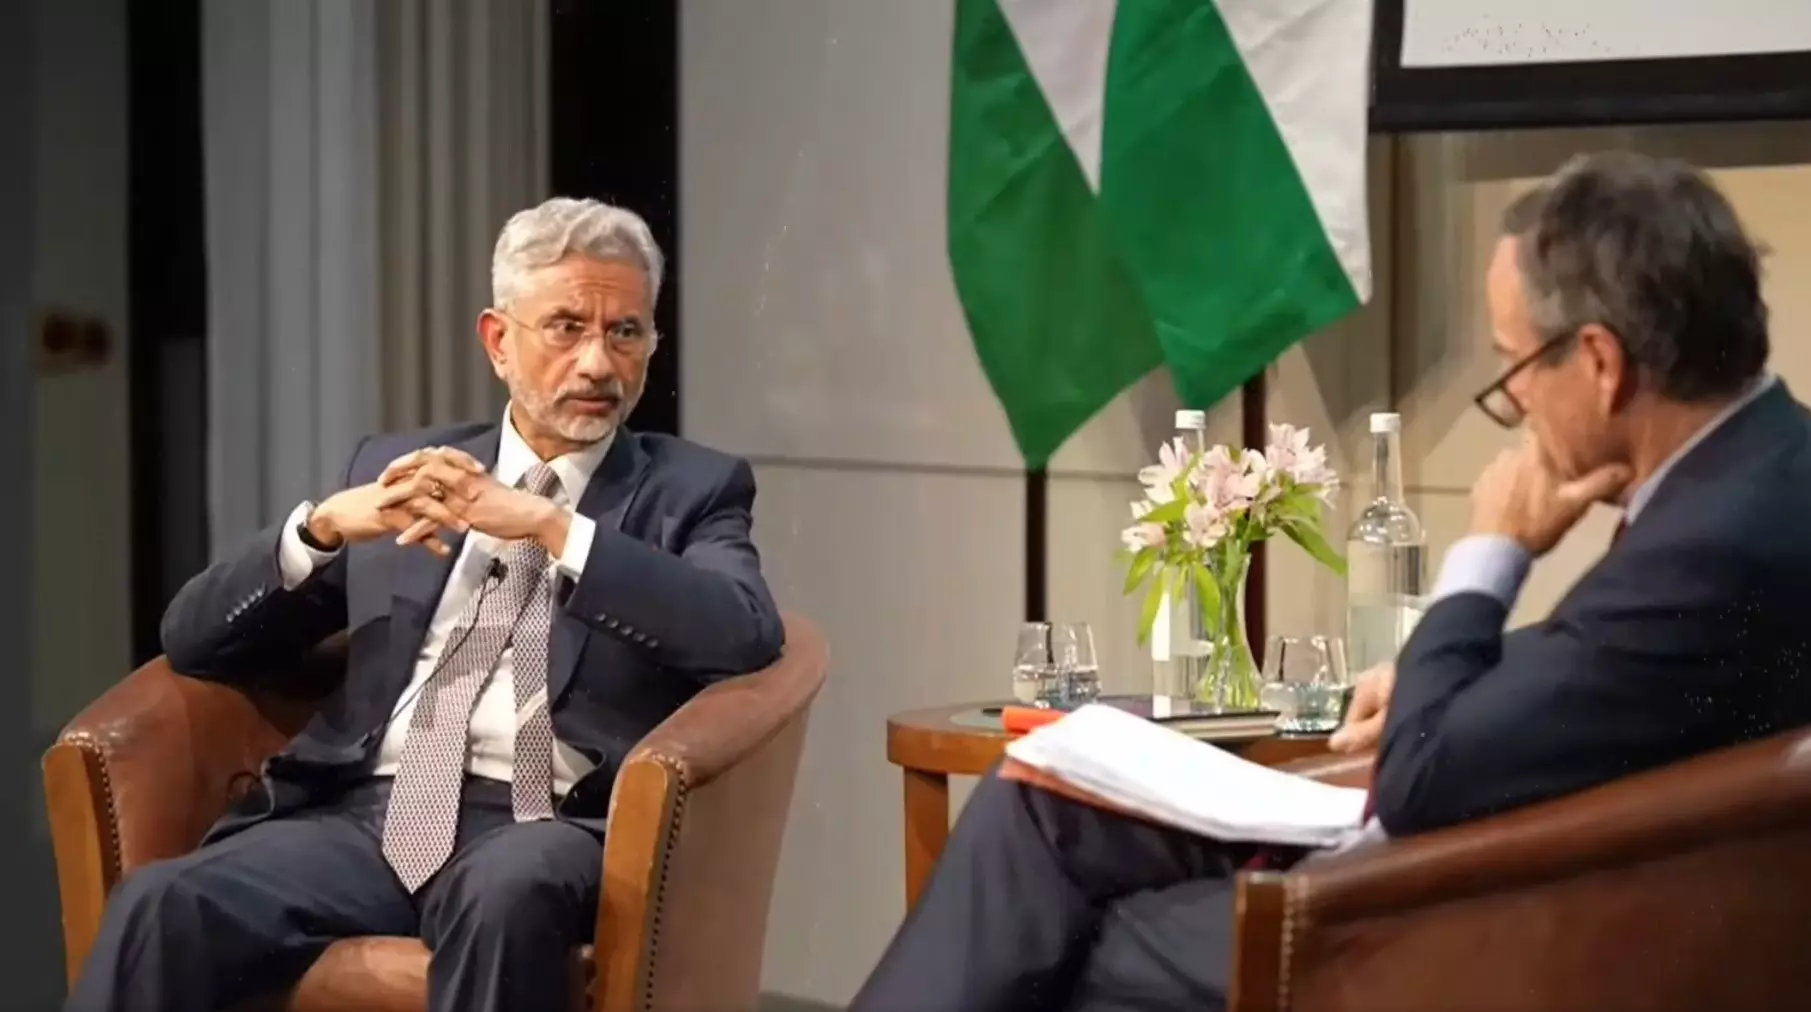 Not ruling out probe but provide proof first: Jaishankar on Canada charge